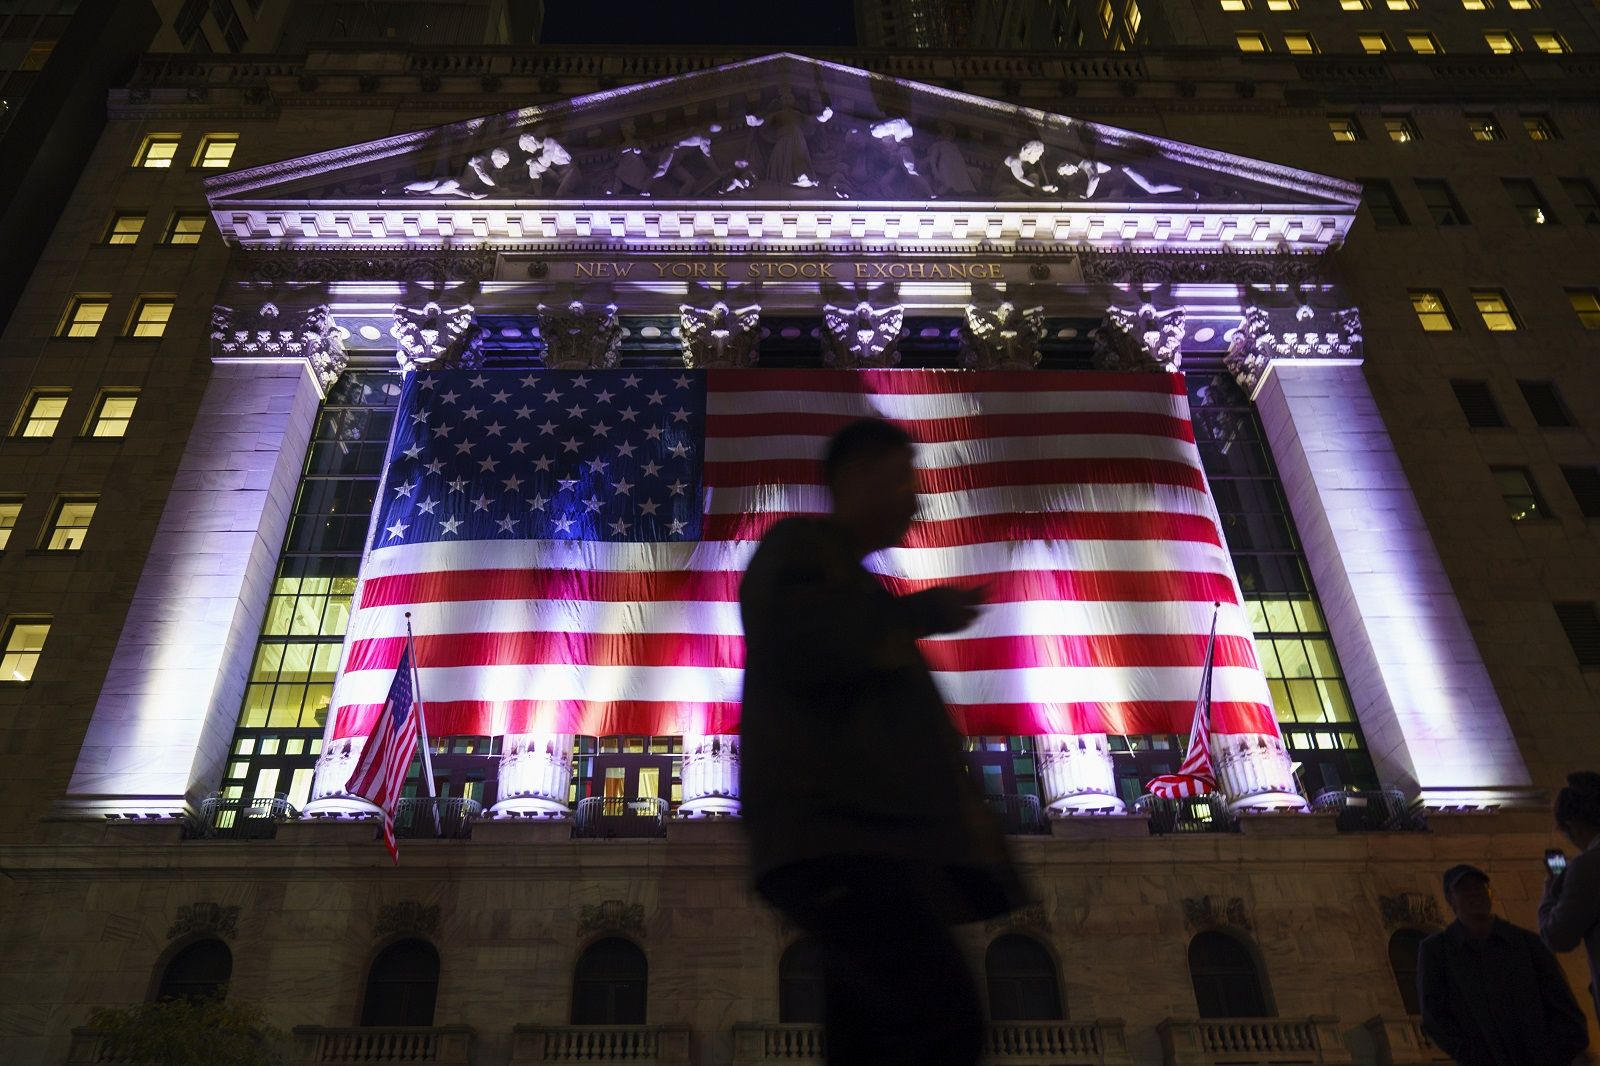 NEW YORK, NY - NOVEMBER 10: An American flag hangs on facade of the New York Stock Exchange (NYSE) for Veterans Day, November 10, 2017 in New York City. The United States will mark Veterans Day this Saturday, November 11. (Drew Angerer/Getty Images)